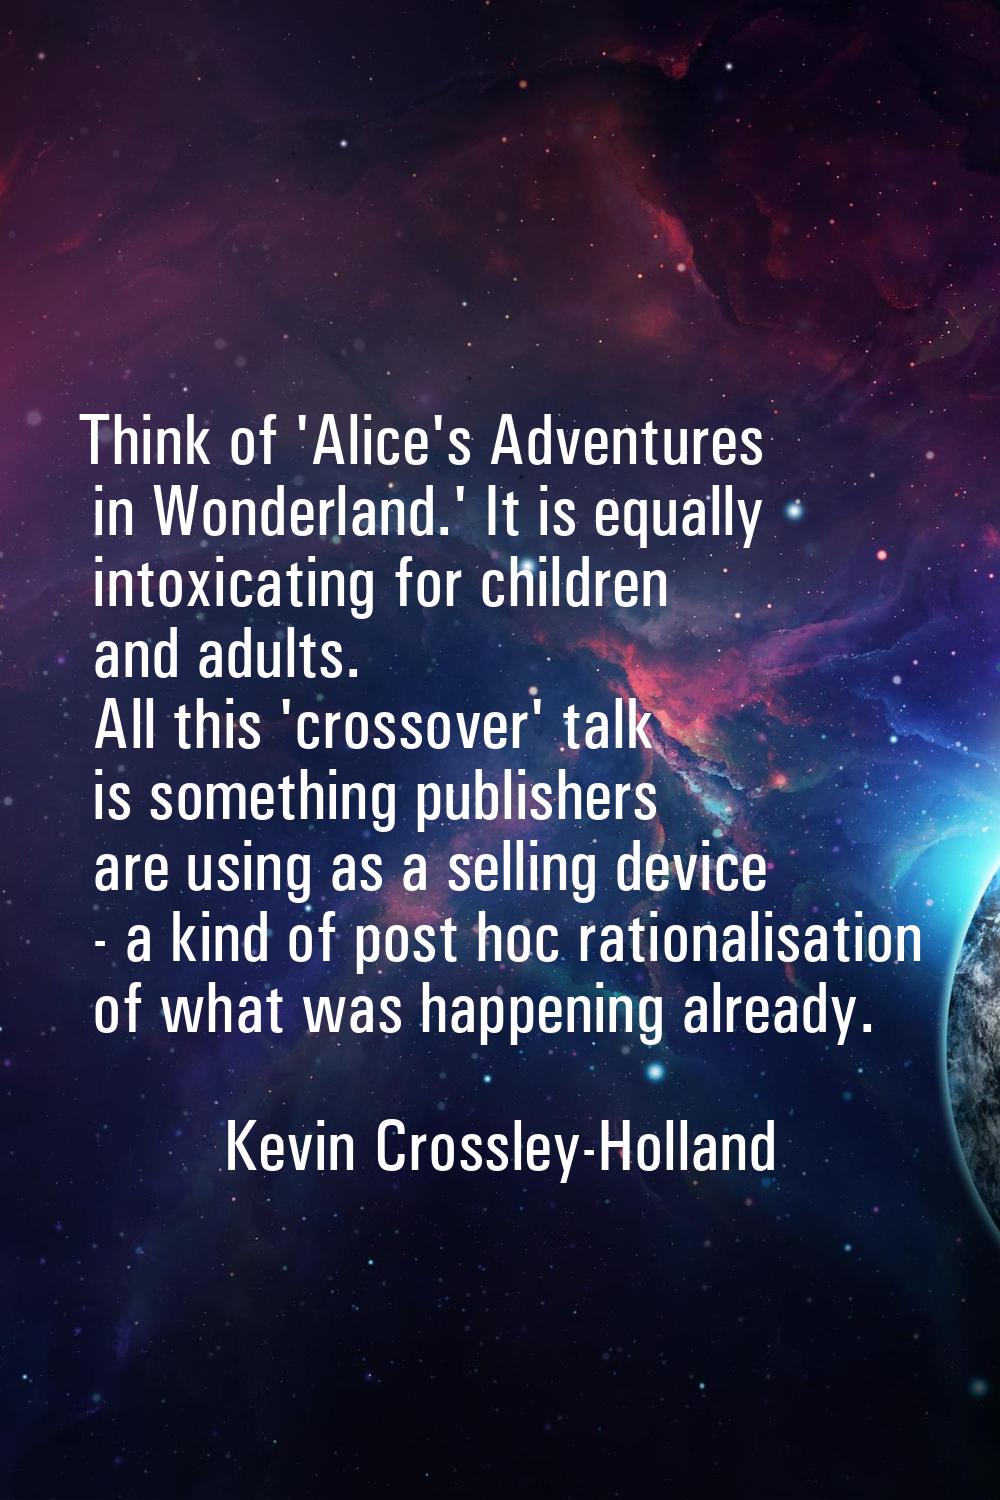 Think of 'Alice's Adventures in Wonderland.' It is equally intoxicating for children and adults. Al